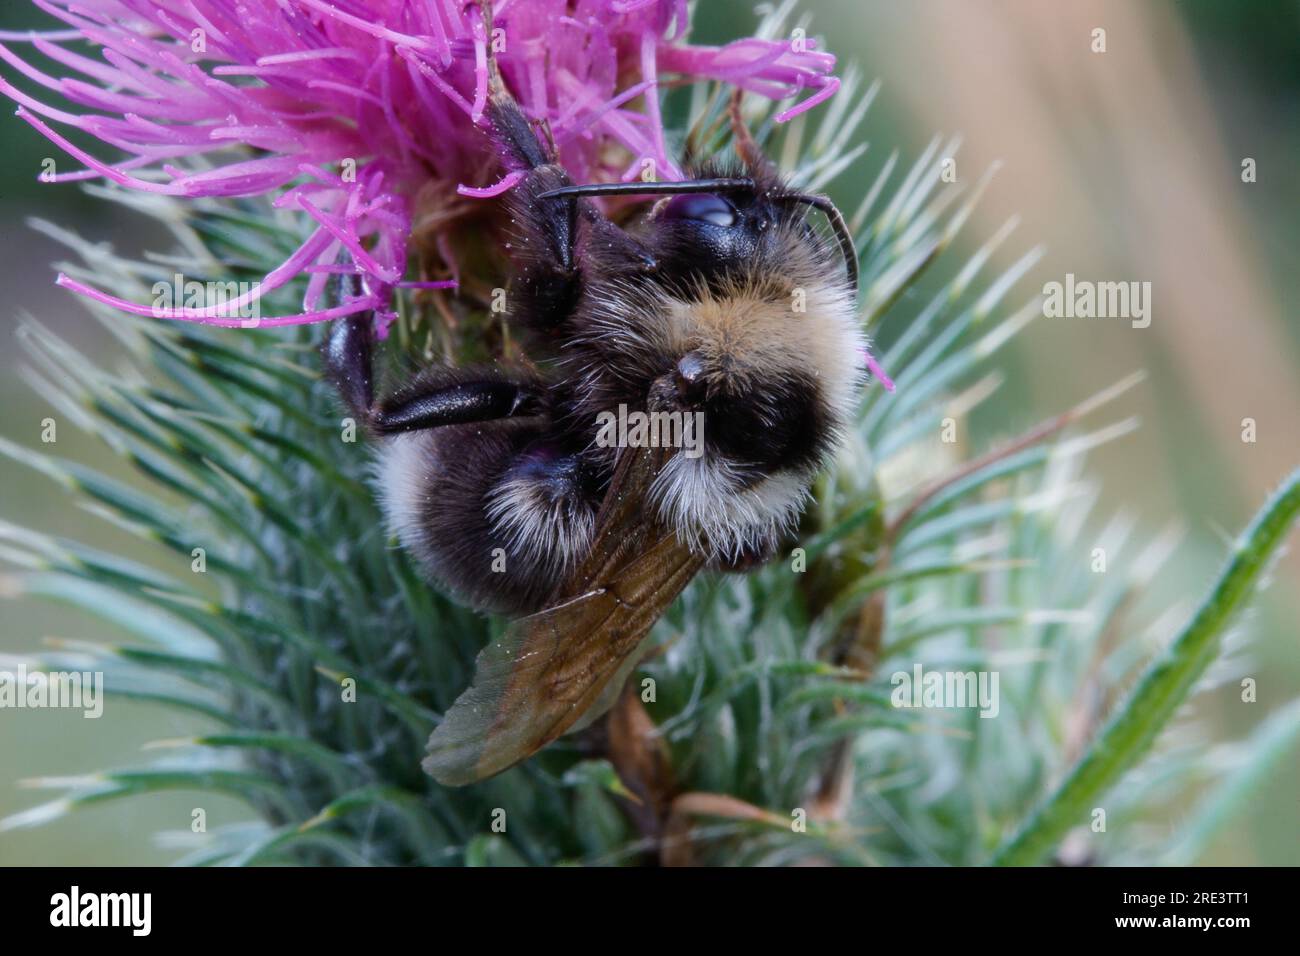 Prickly roost, bumblebee sitting on a thistle early in the morning while still asleep. Stock Photo